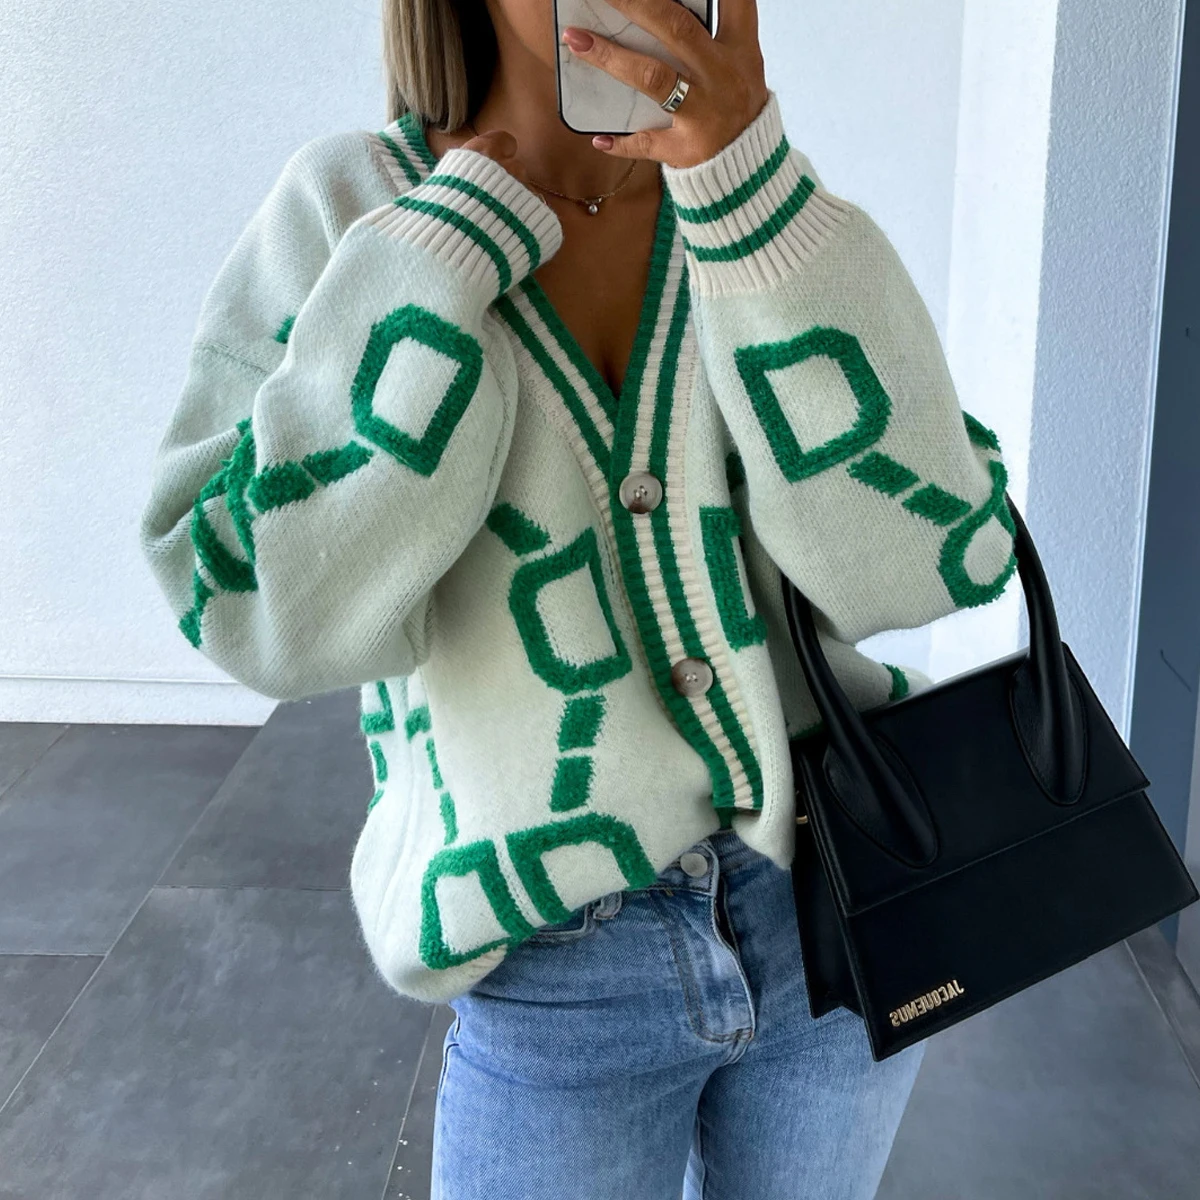 Women Autumn Winter New Loose Knitted Cardiagn Casual  V-neck Drop-shoulder Sleeve Sweater Coat Female Chic Crochet Outerwear cropped sweater